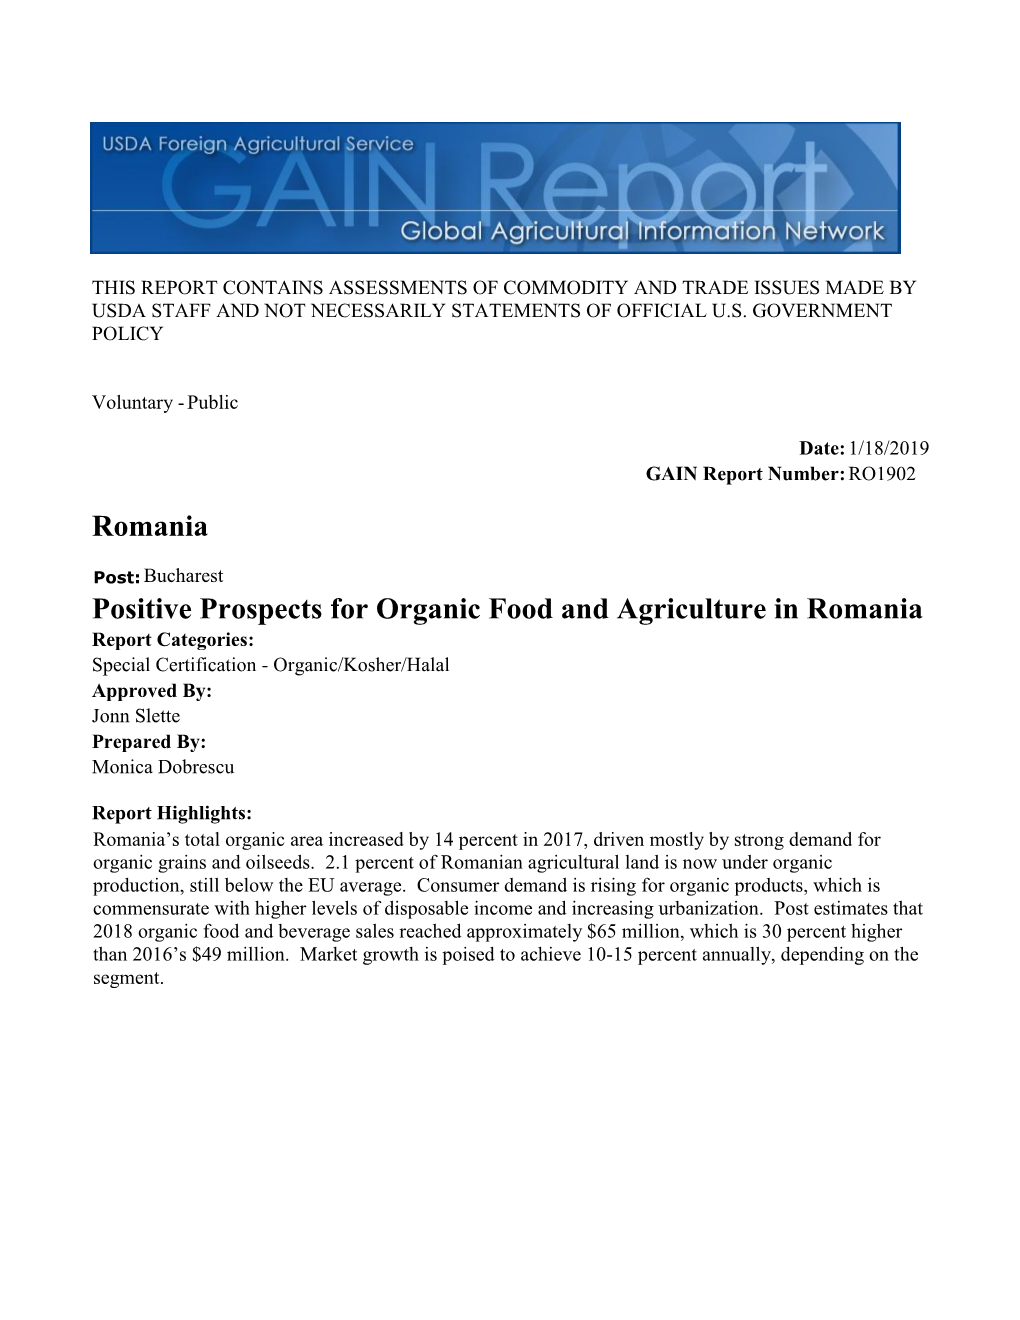 Romania Positive Prospects for Organic Food and Agriculture In